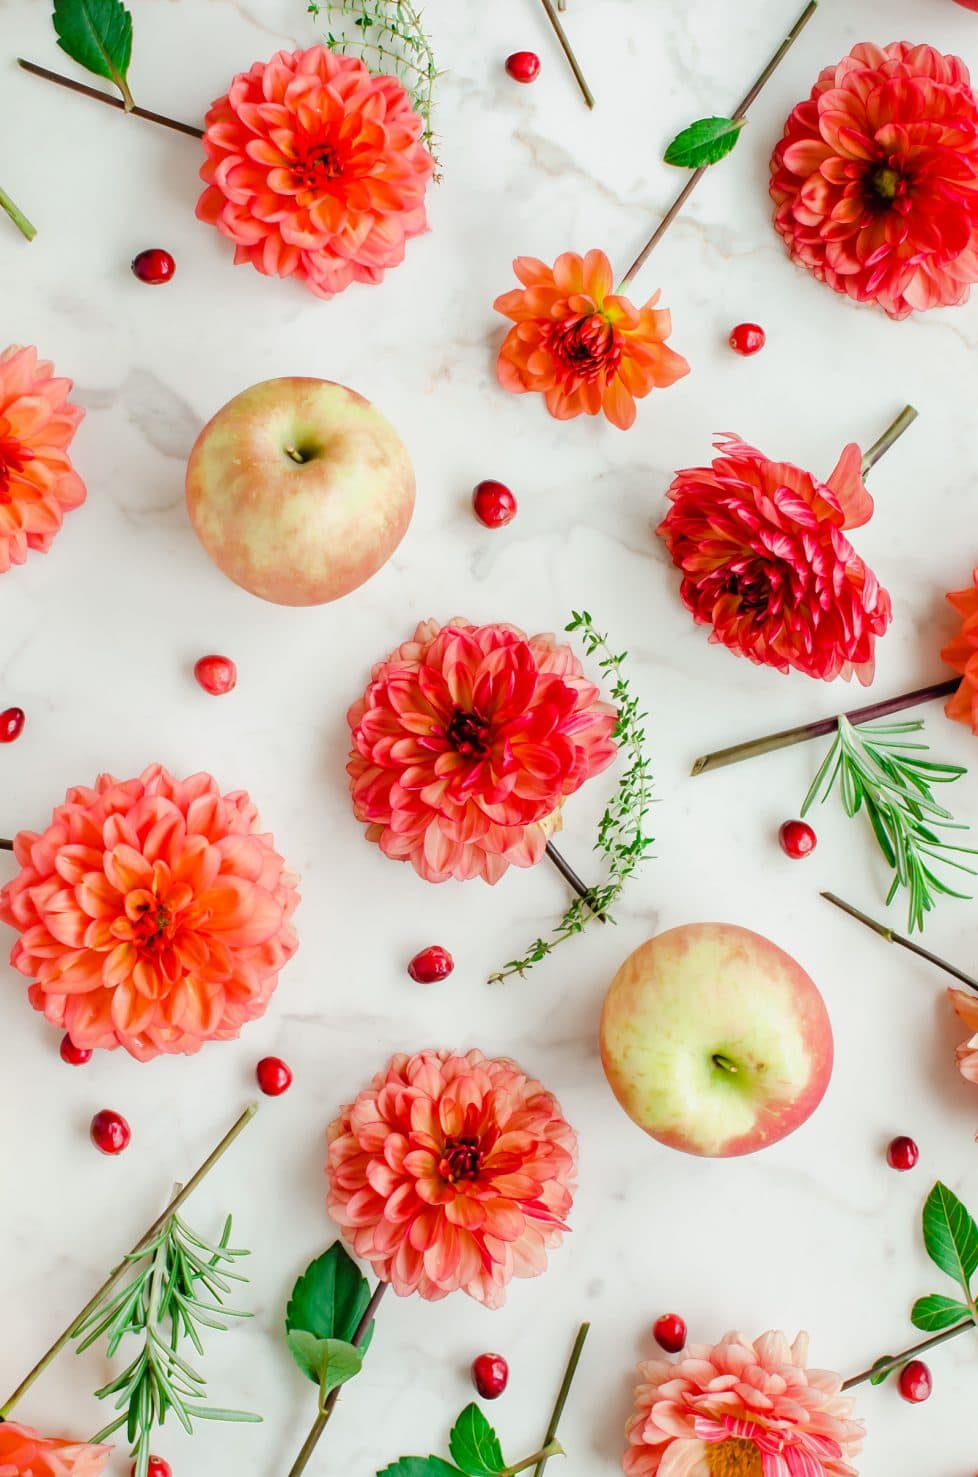 Dahlia flowers laid on a white counter top with apples, rosemary, and fresh cranberries. 